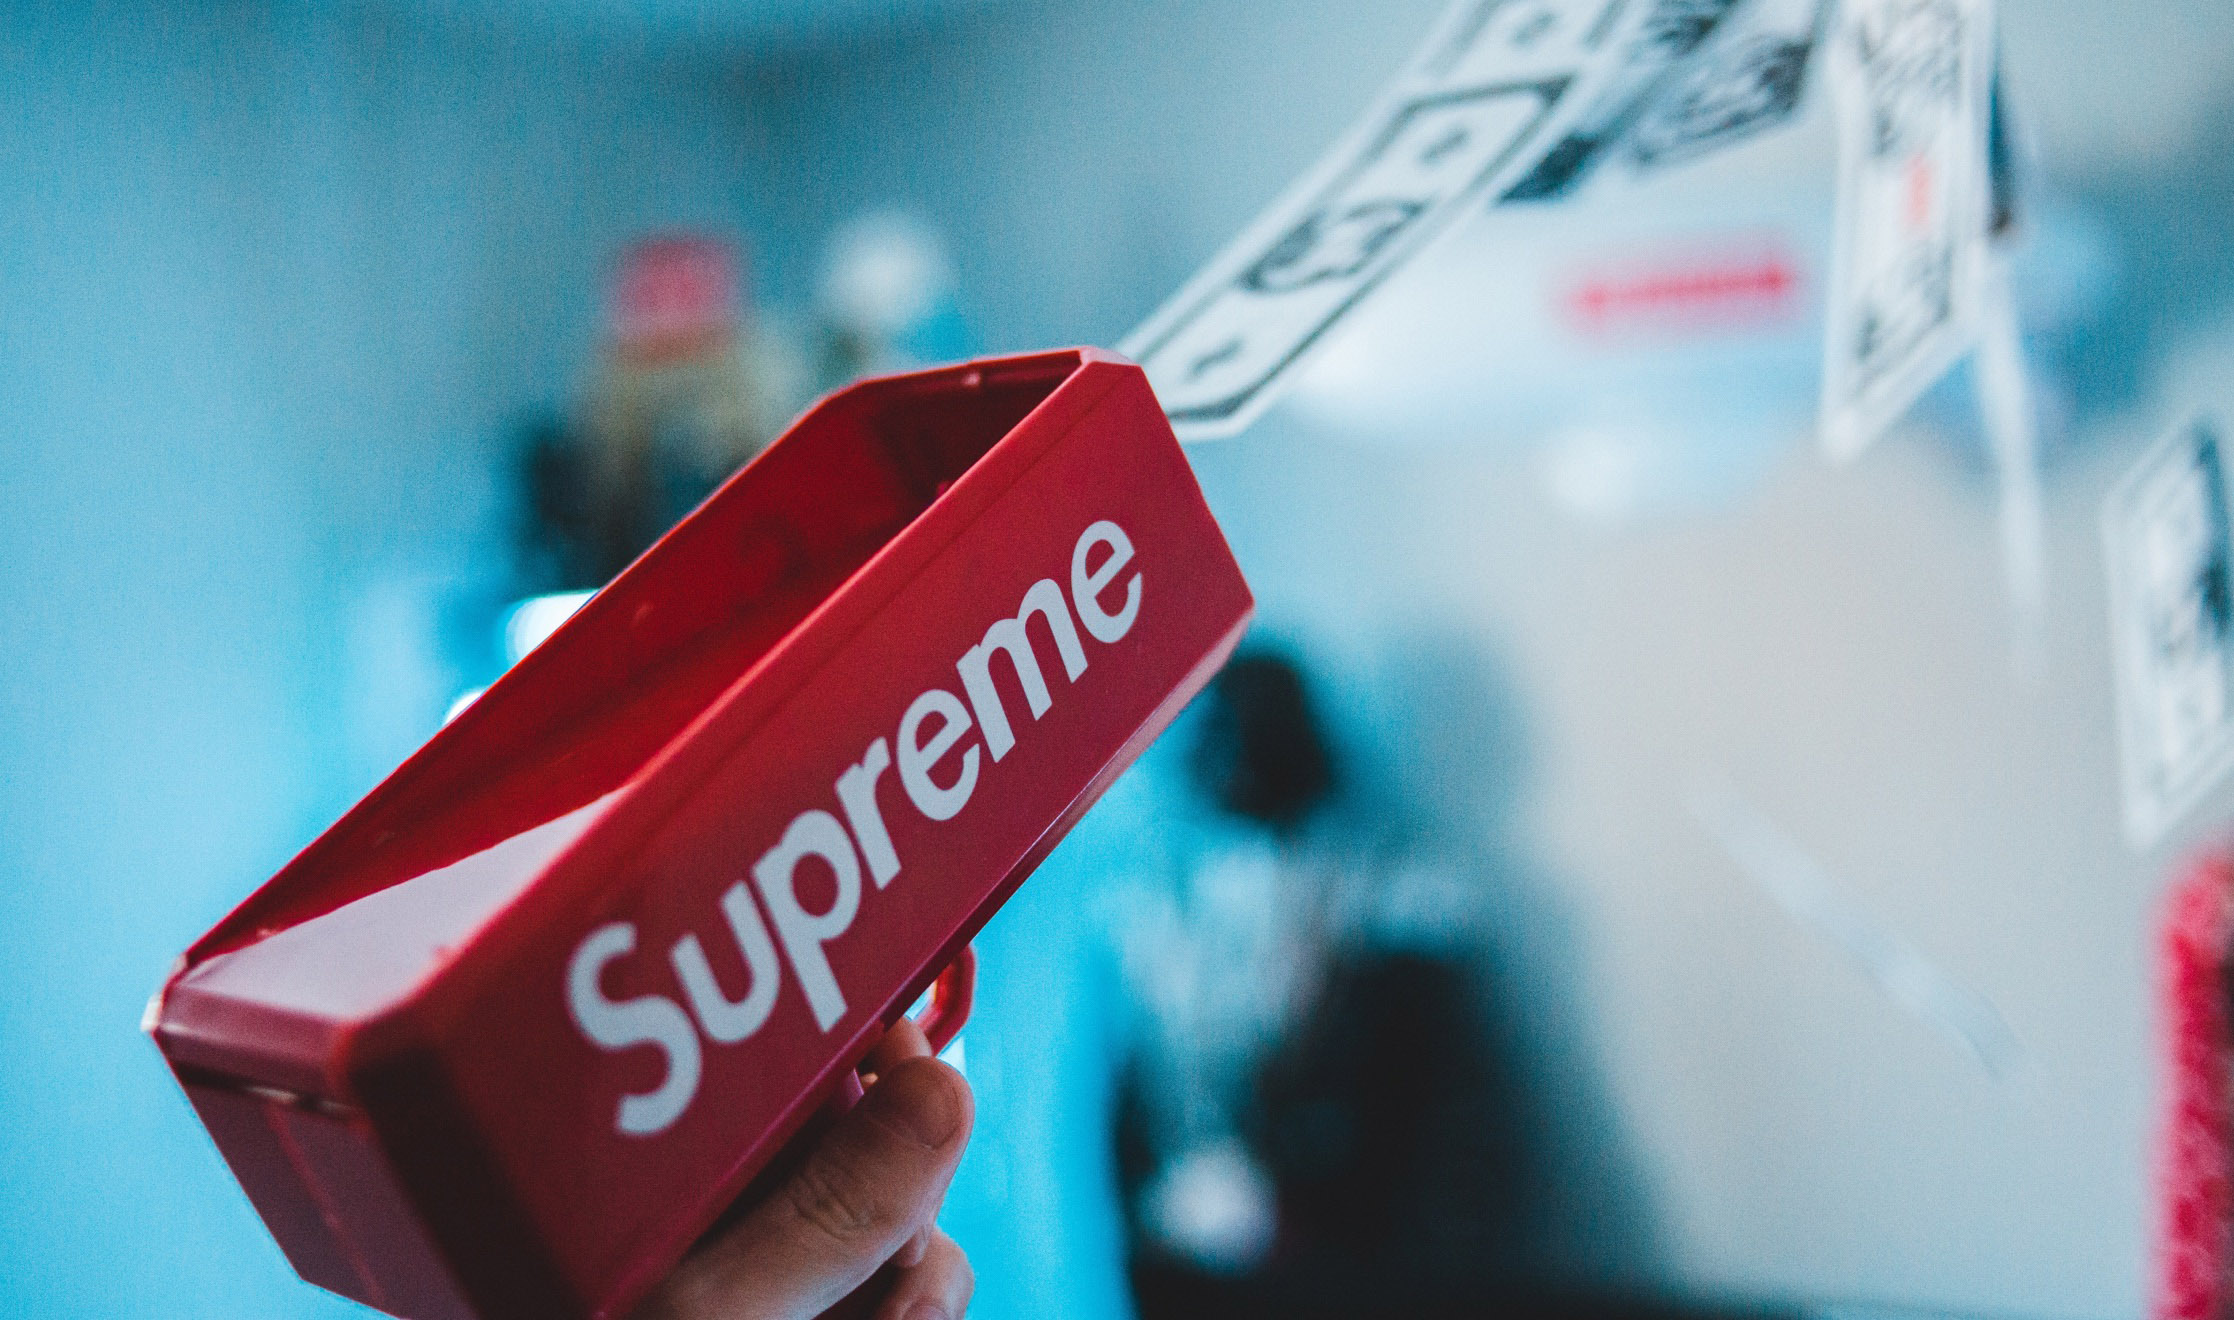 The Supreme Effect: What the streetwear giant can teach all businesses about brand experience